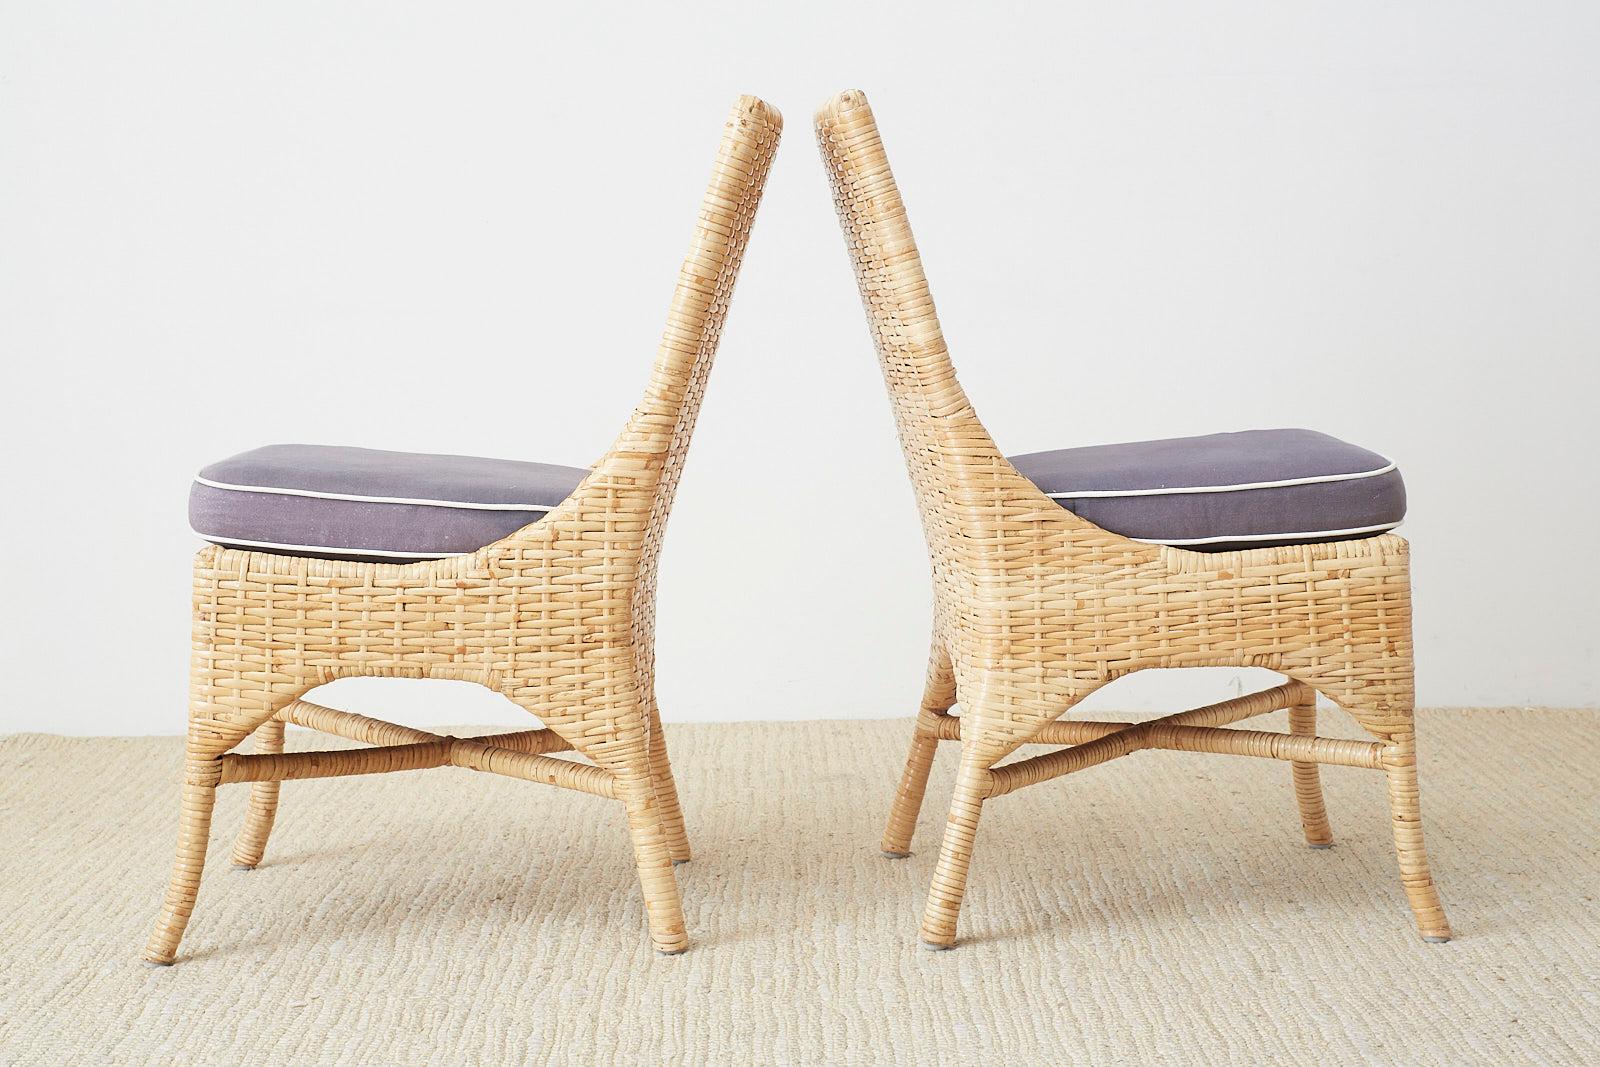 20th Century Set of Four McGuire Woven Rattan Wicker Dining Chairs